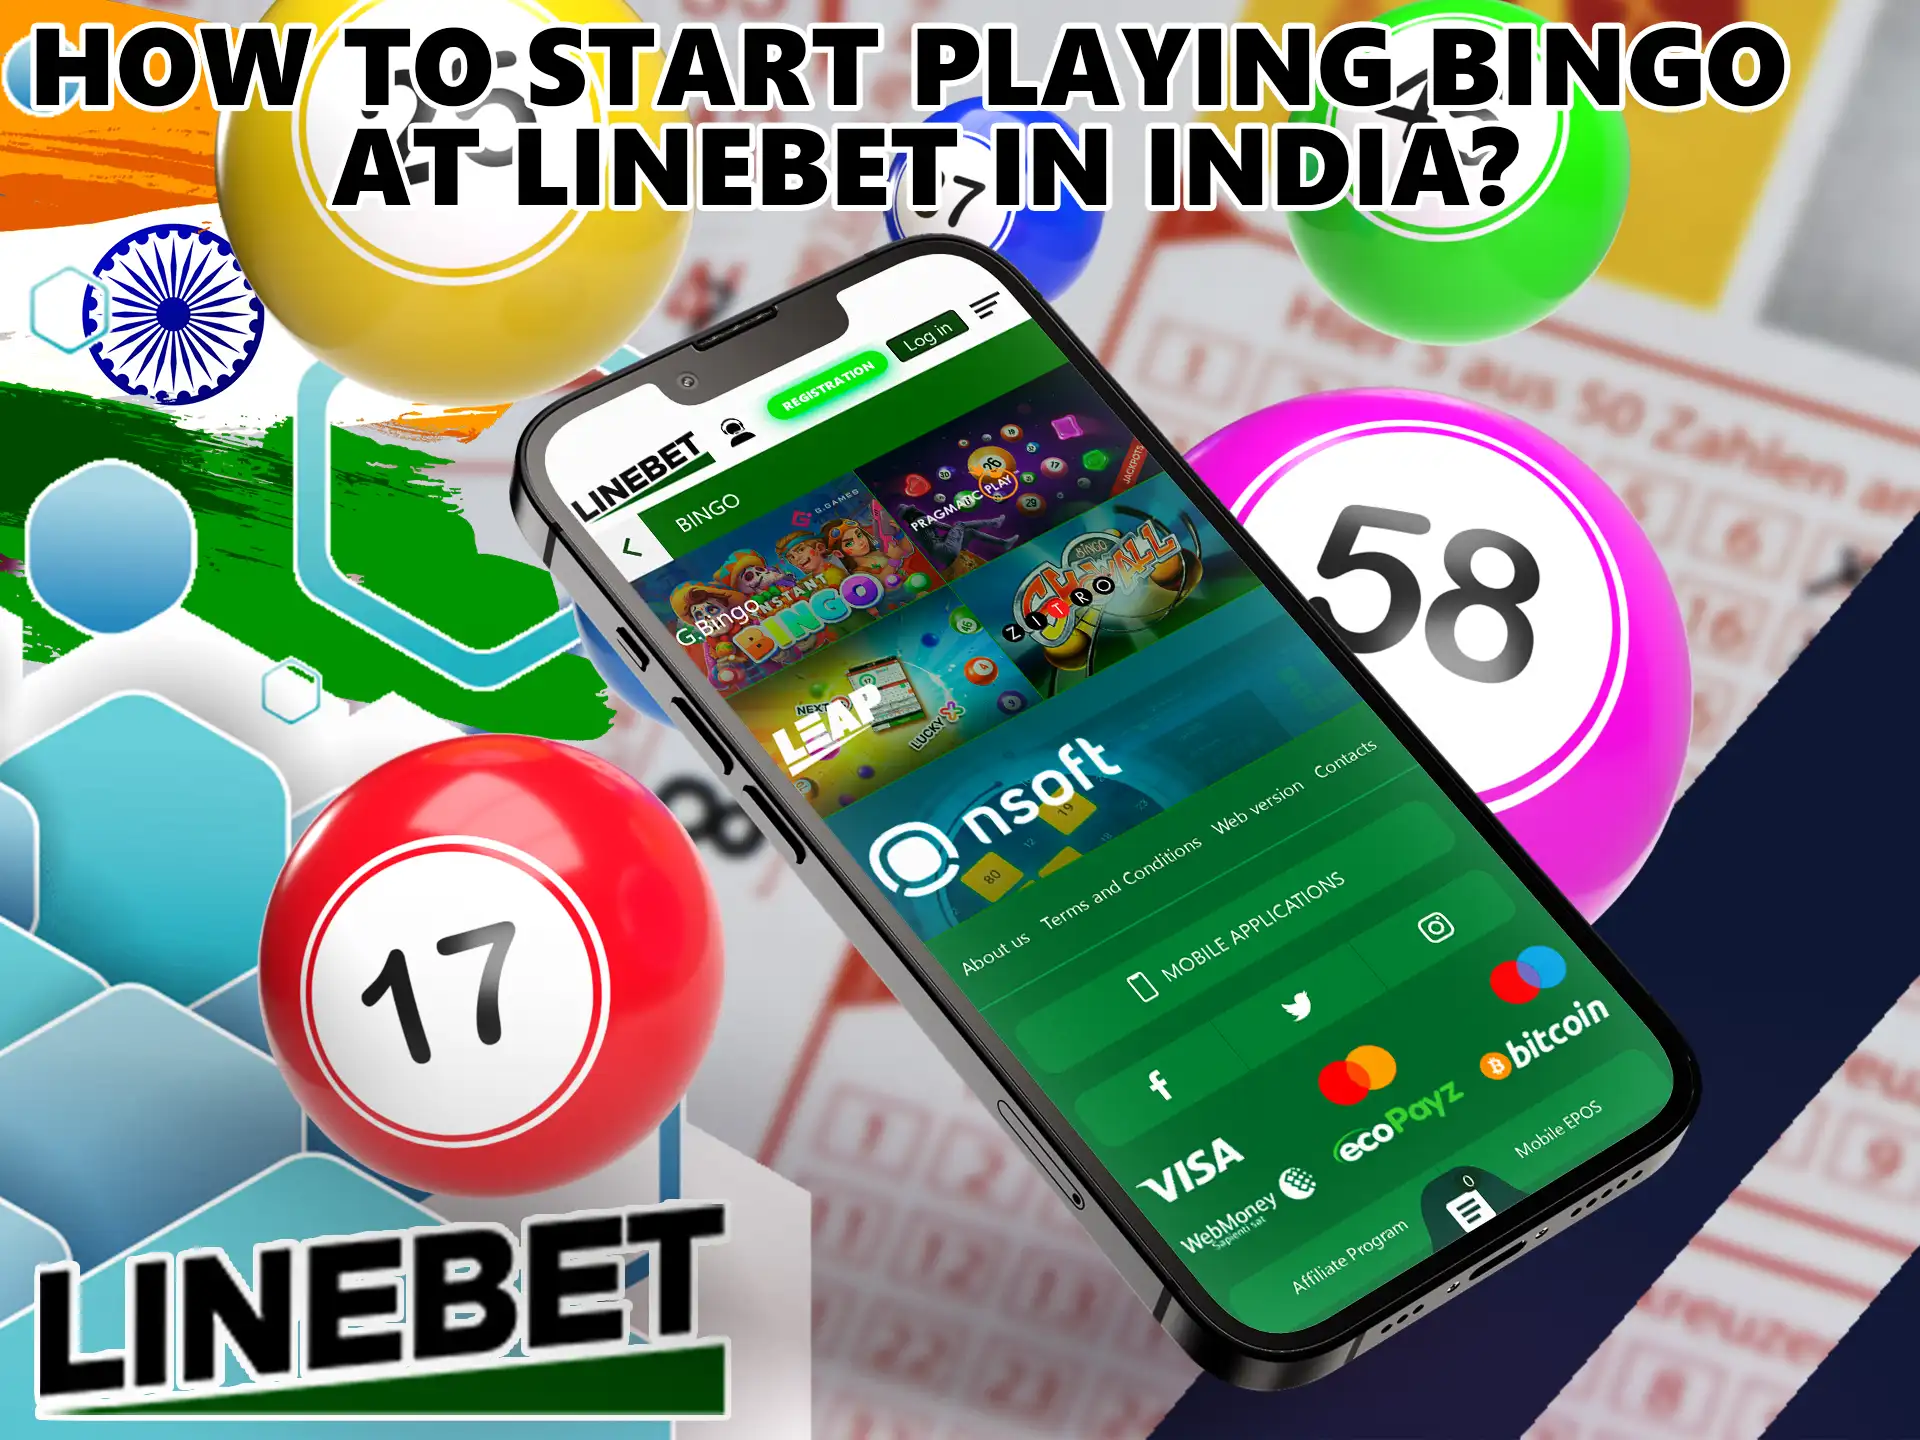 You'll be able to enjoy an amazing experience ofinteractions in this section, you should start the game by registering a Linebet account.